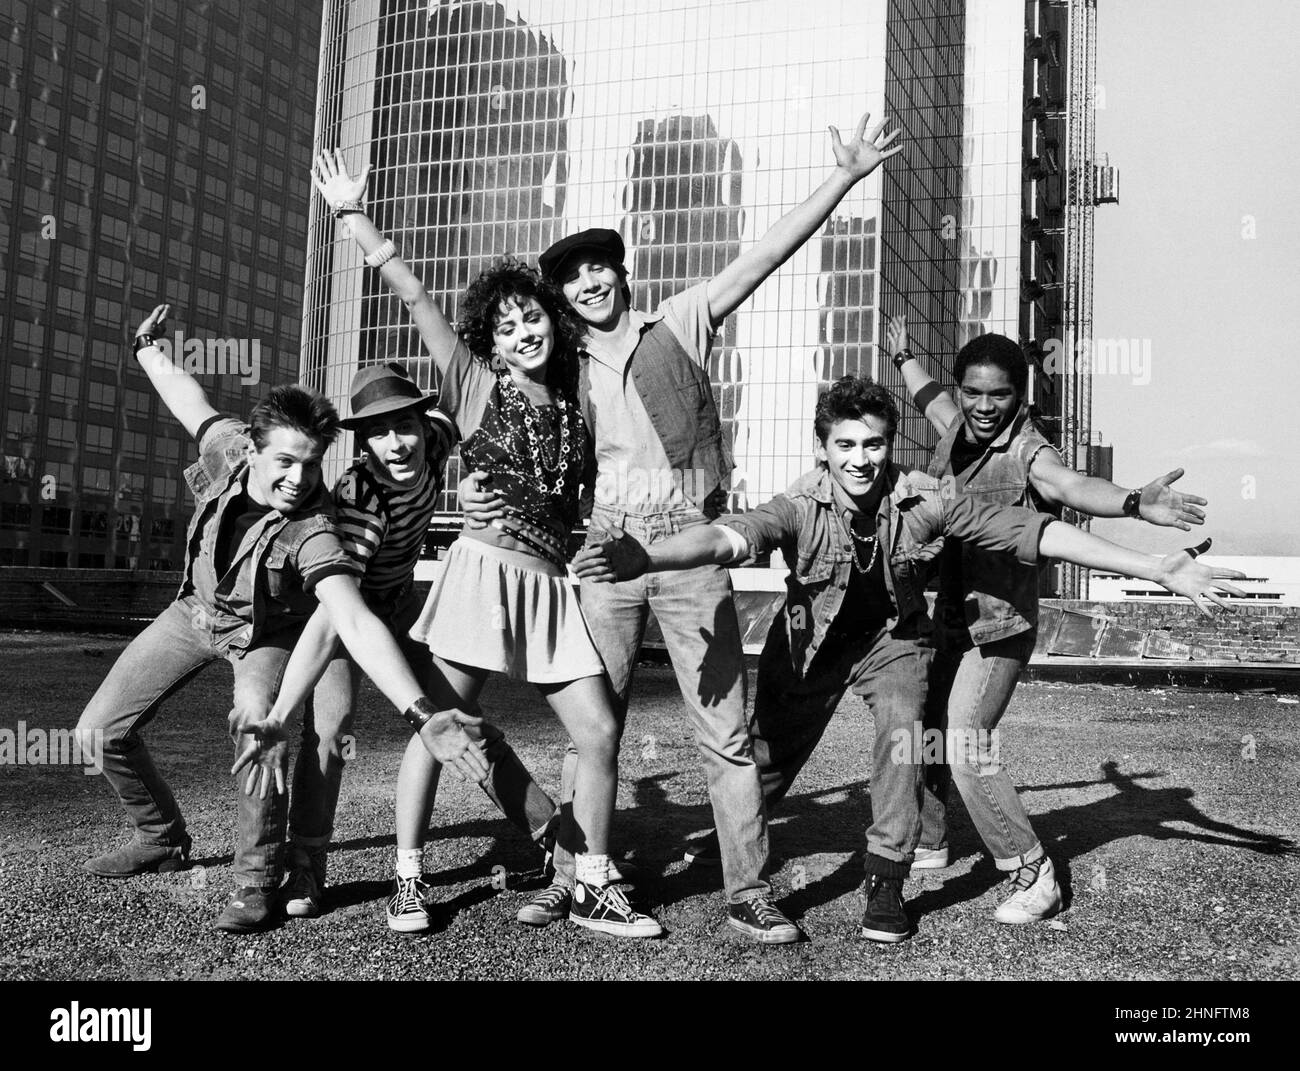 James LeGros, Wally Ward, Karen Petrasek, Rob Stone, Anthony Barrile Lance Slaughter, Publicity Portrait for the TV Movie, 'Ace Hits the Big Time', CBS-TV, 1985 Stock Photo